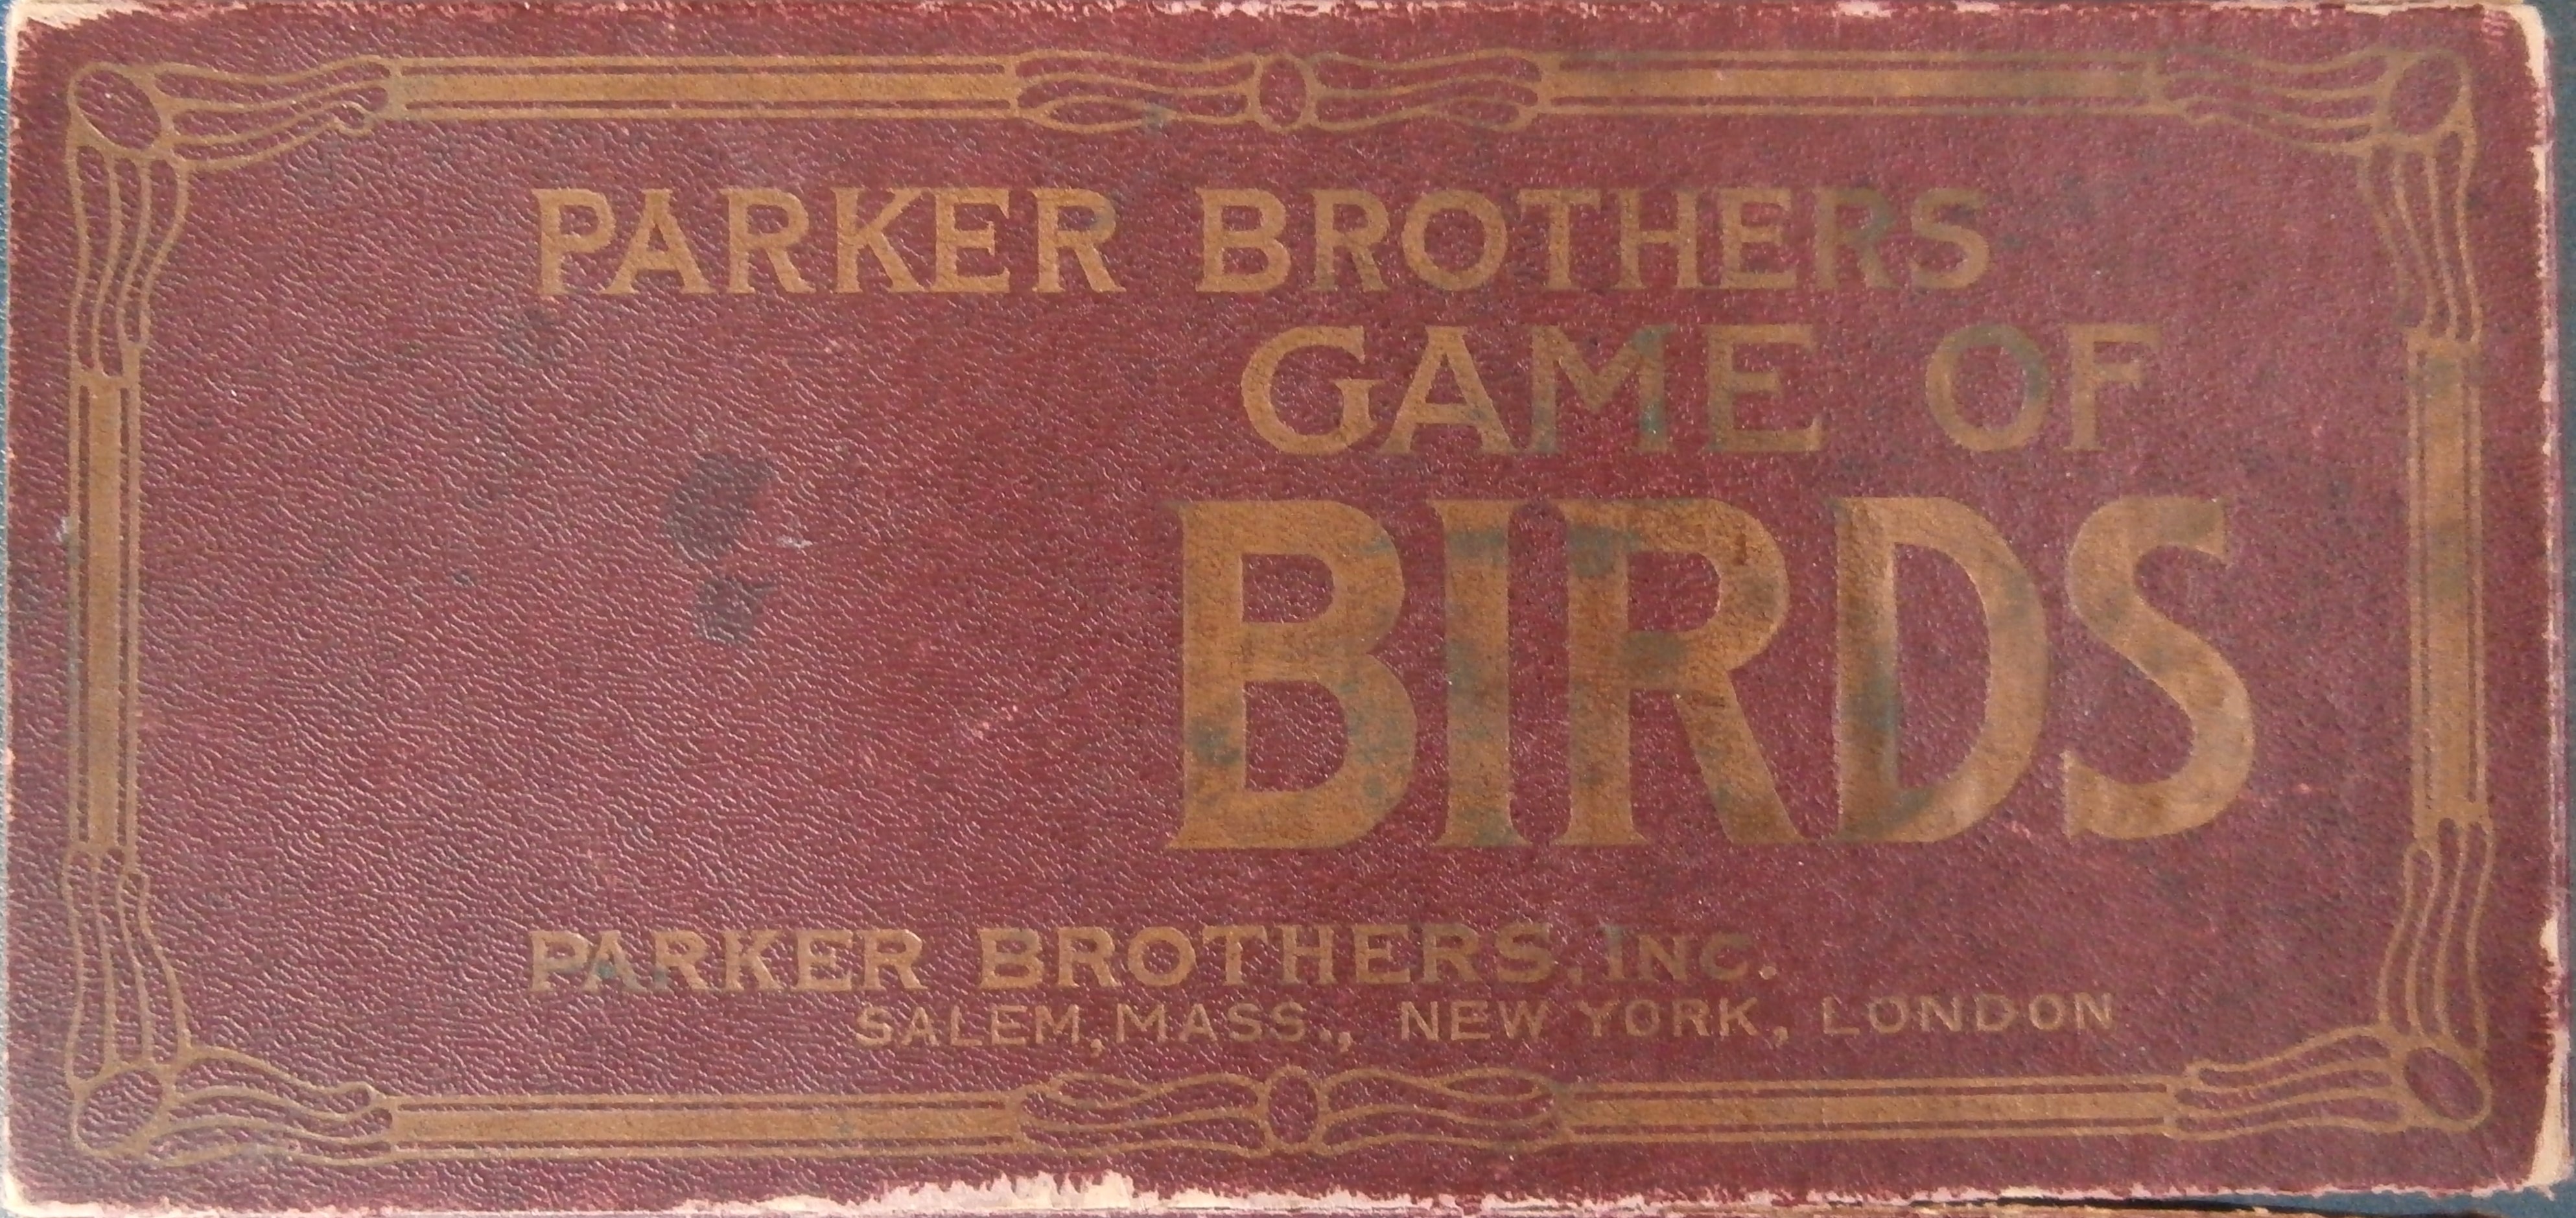 Old Parker Brothers Game of Birds